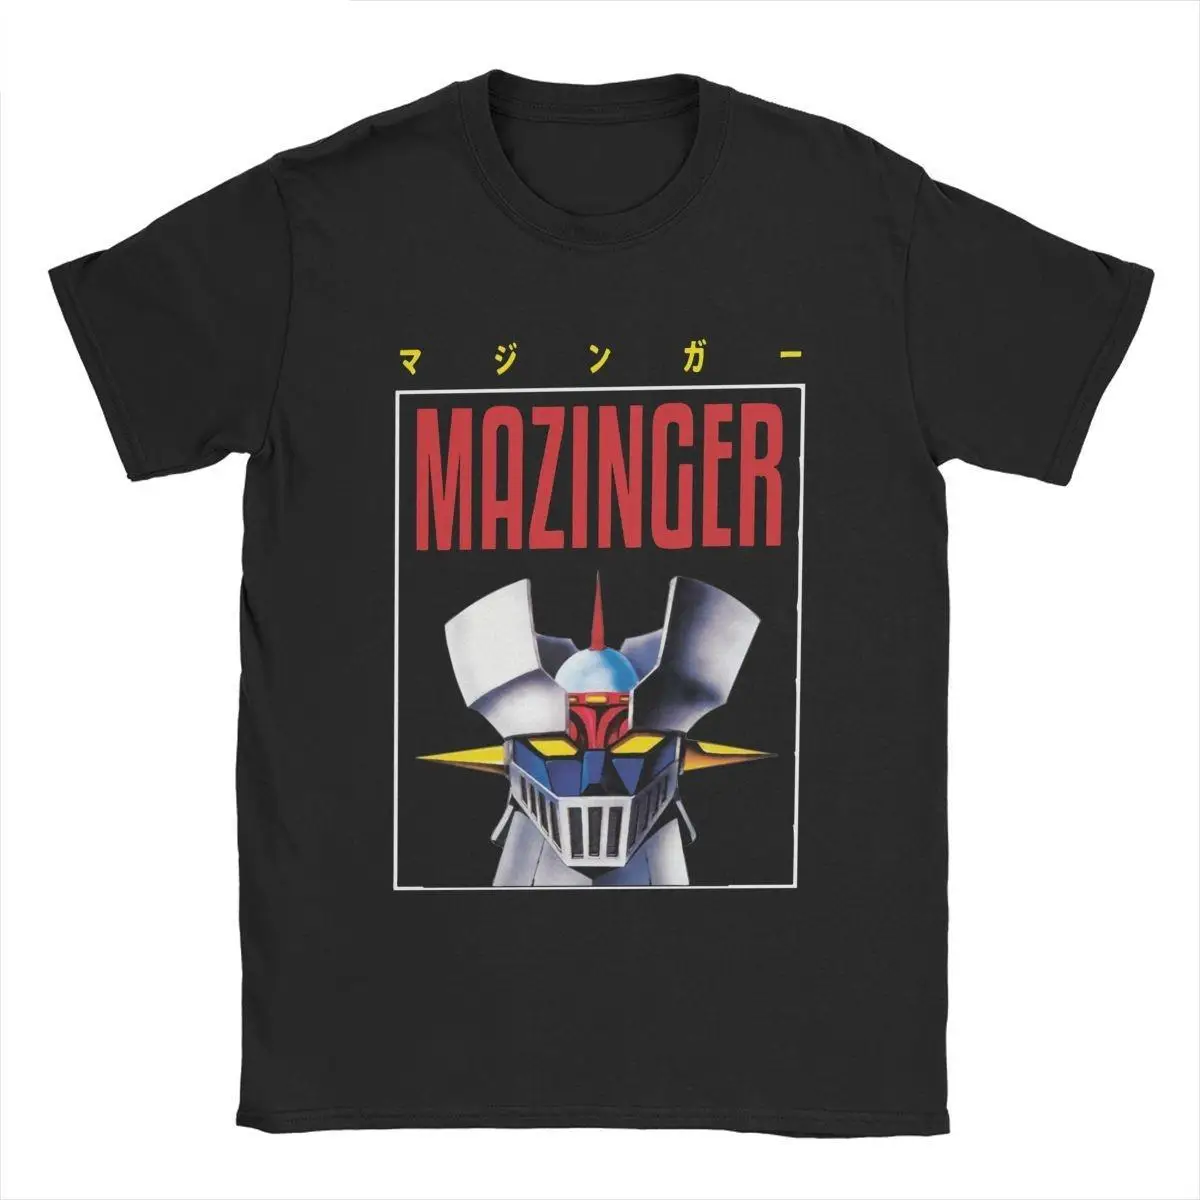 Mazinger Z Anime Robot T Shirts for Men Pure Cotton Humorous T-Shirt O Neck Tee Shirt Short Sleeve Tops Graphic